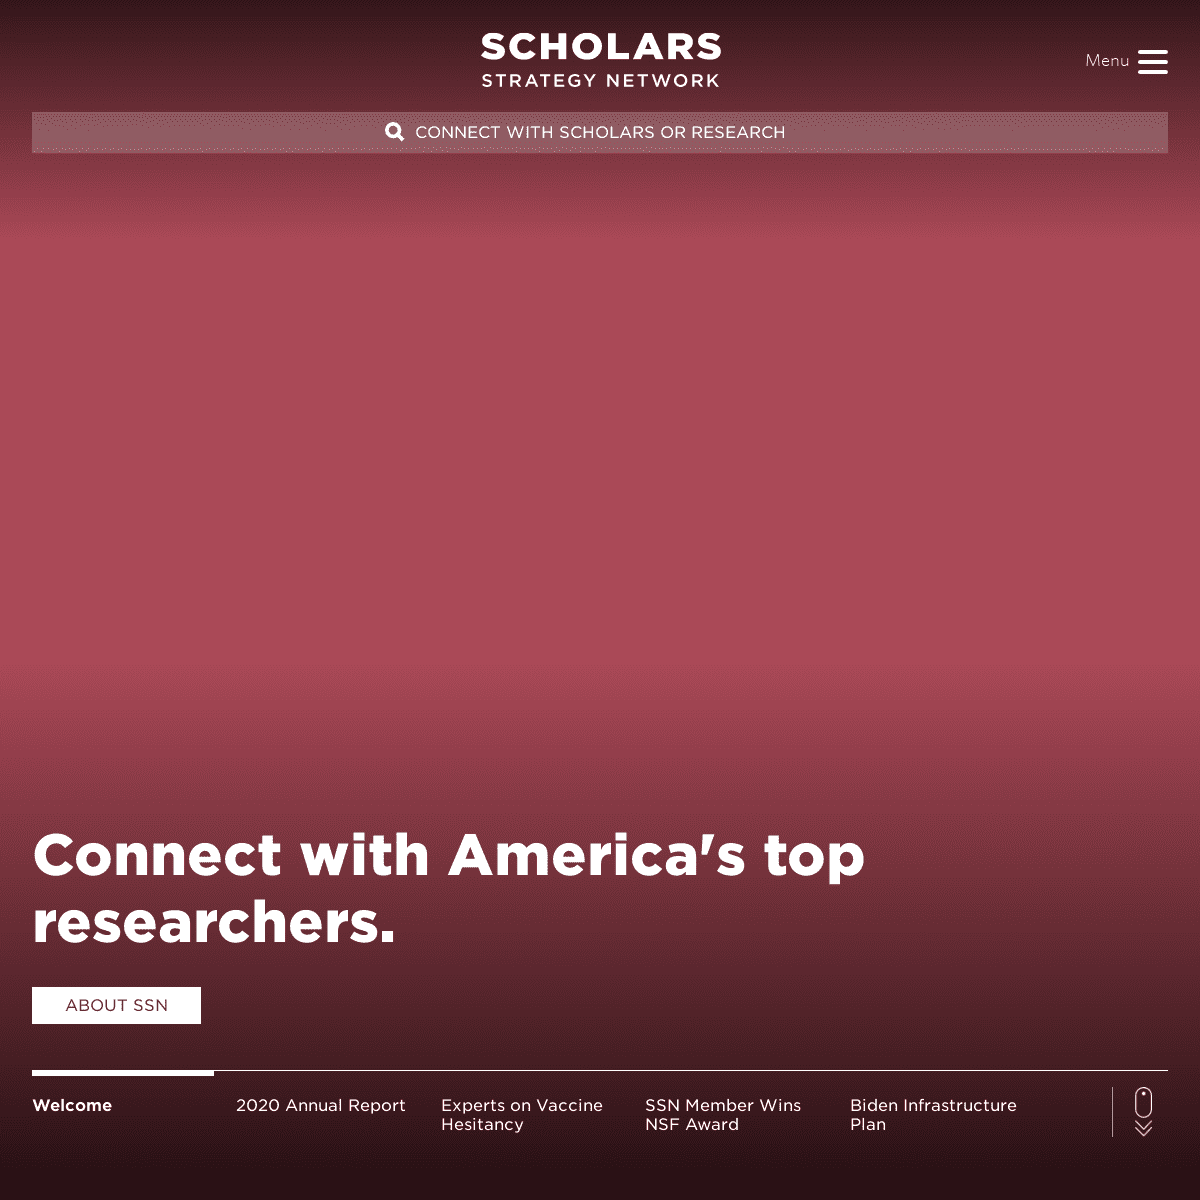 A complete backup of https://scholarsstrategynetwork.org